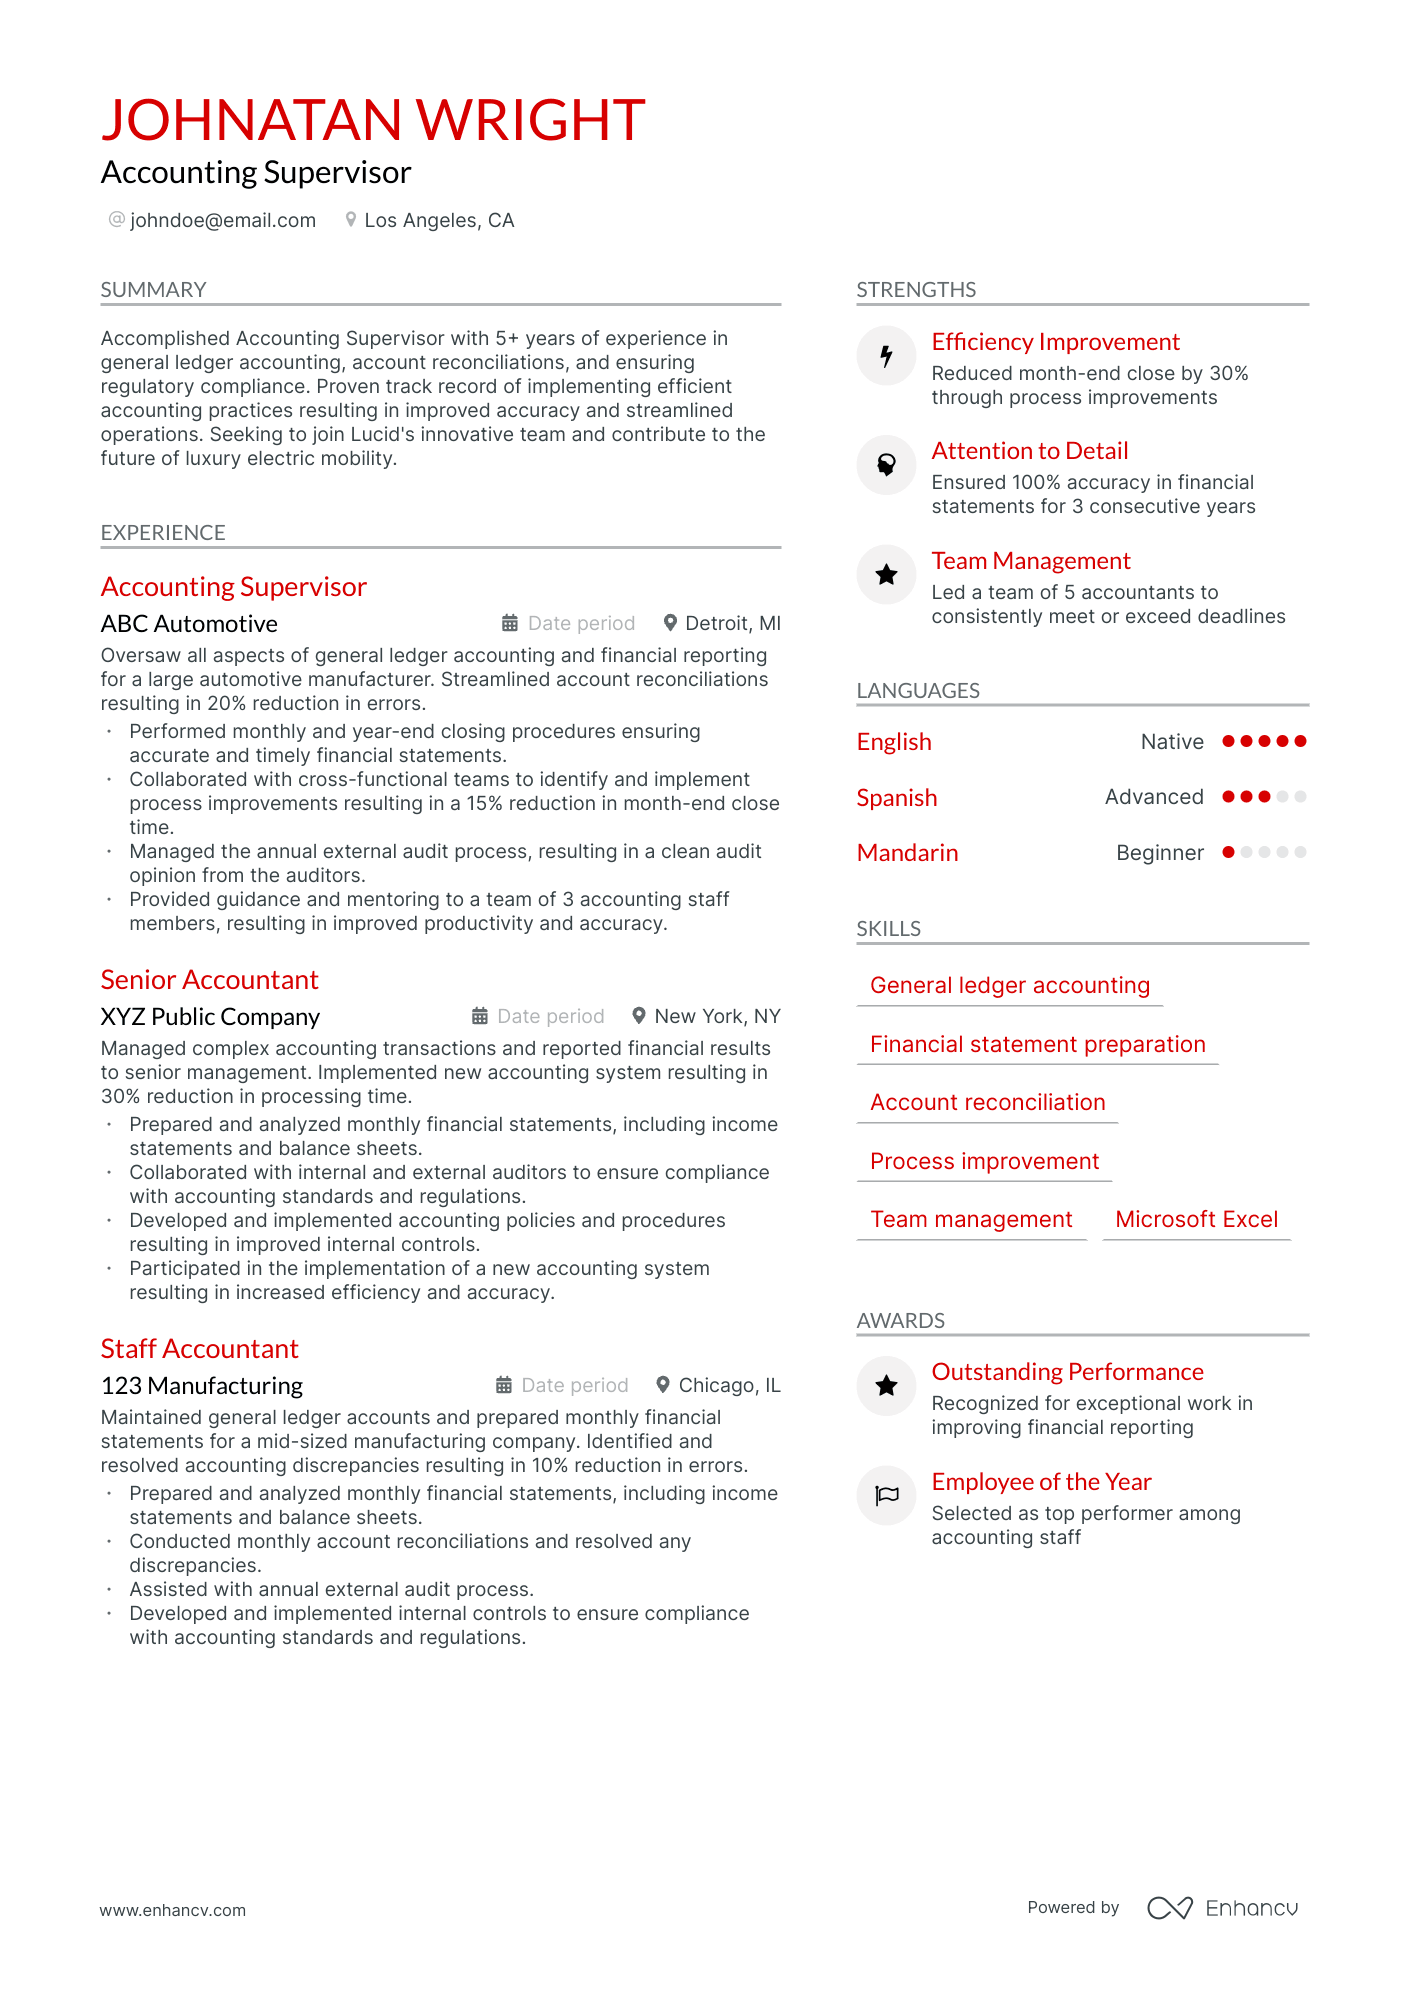 Accounting Supervisor resume example